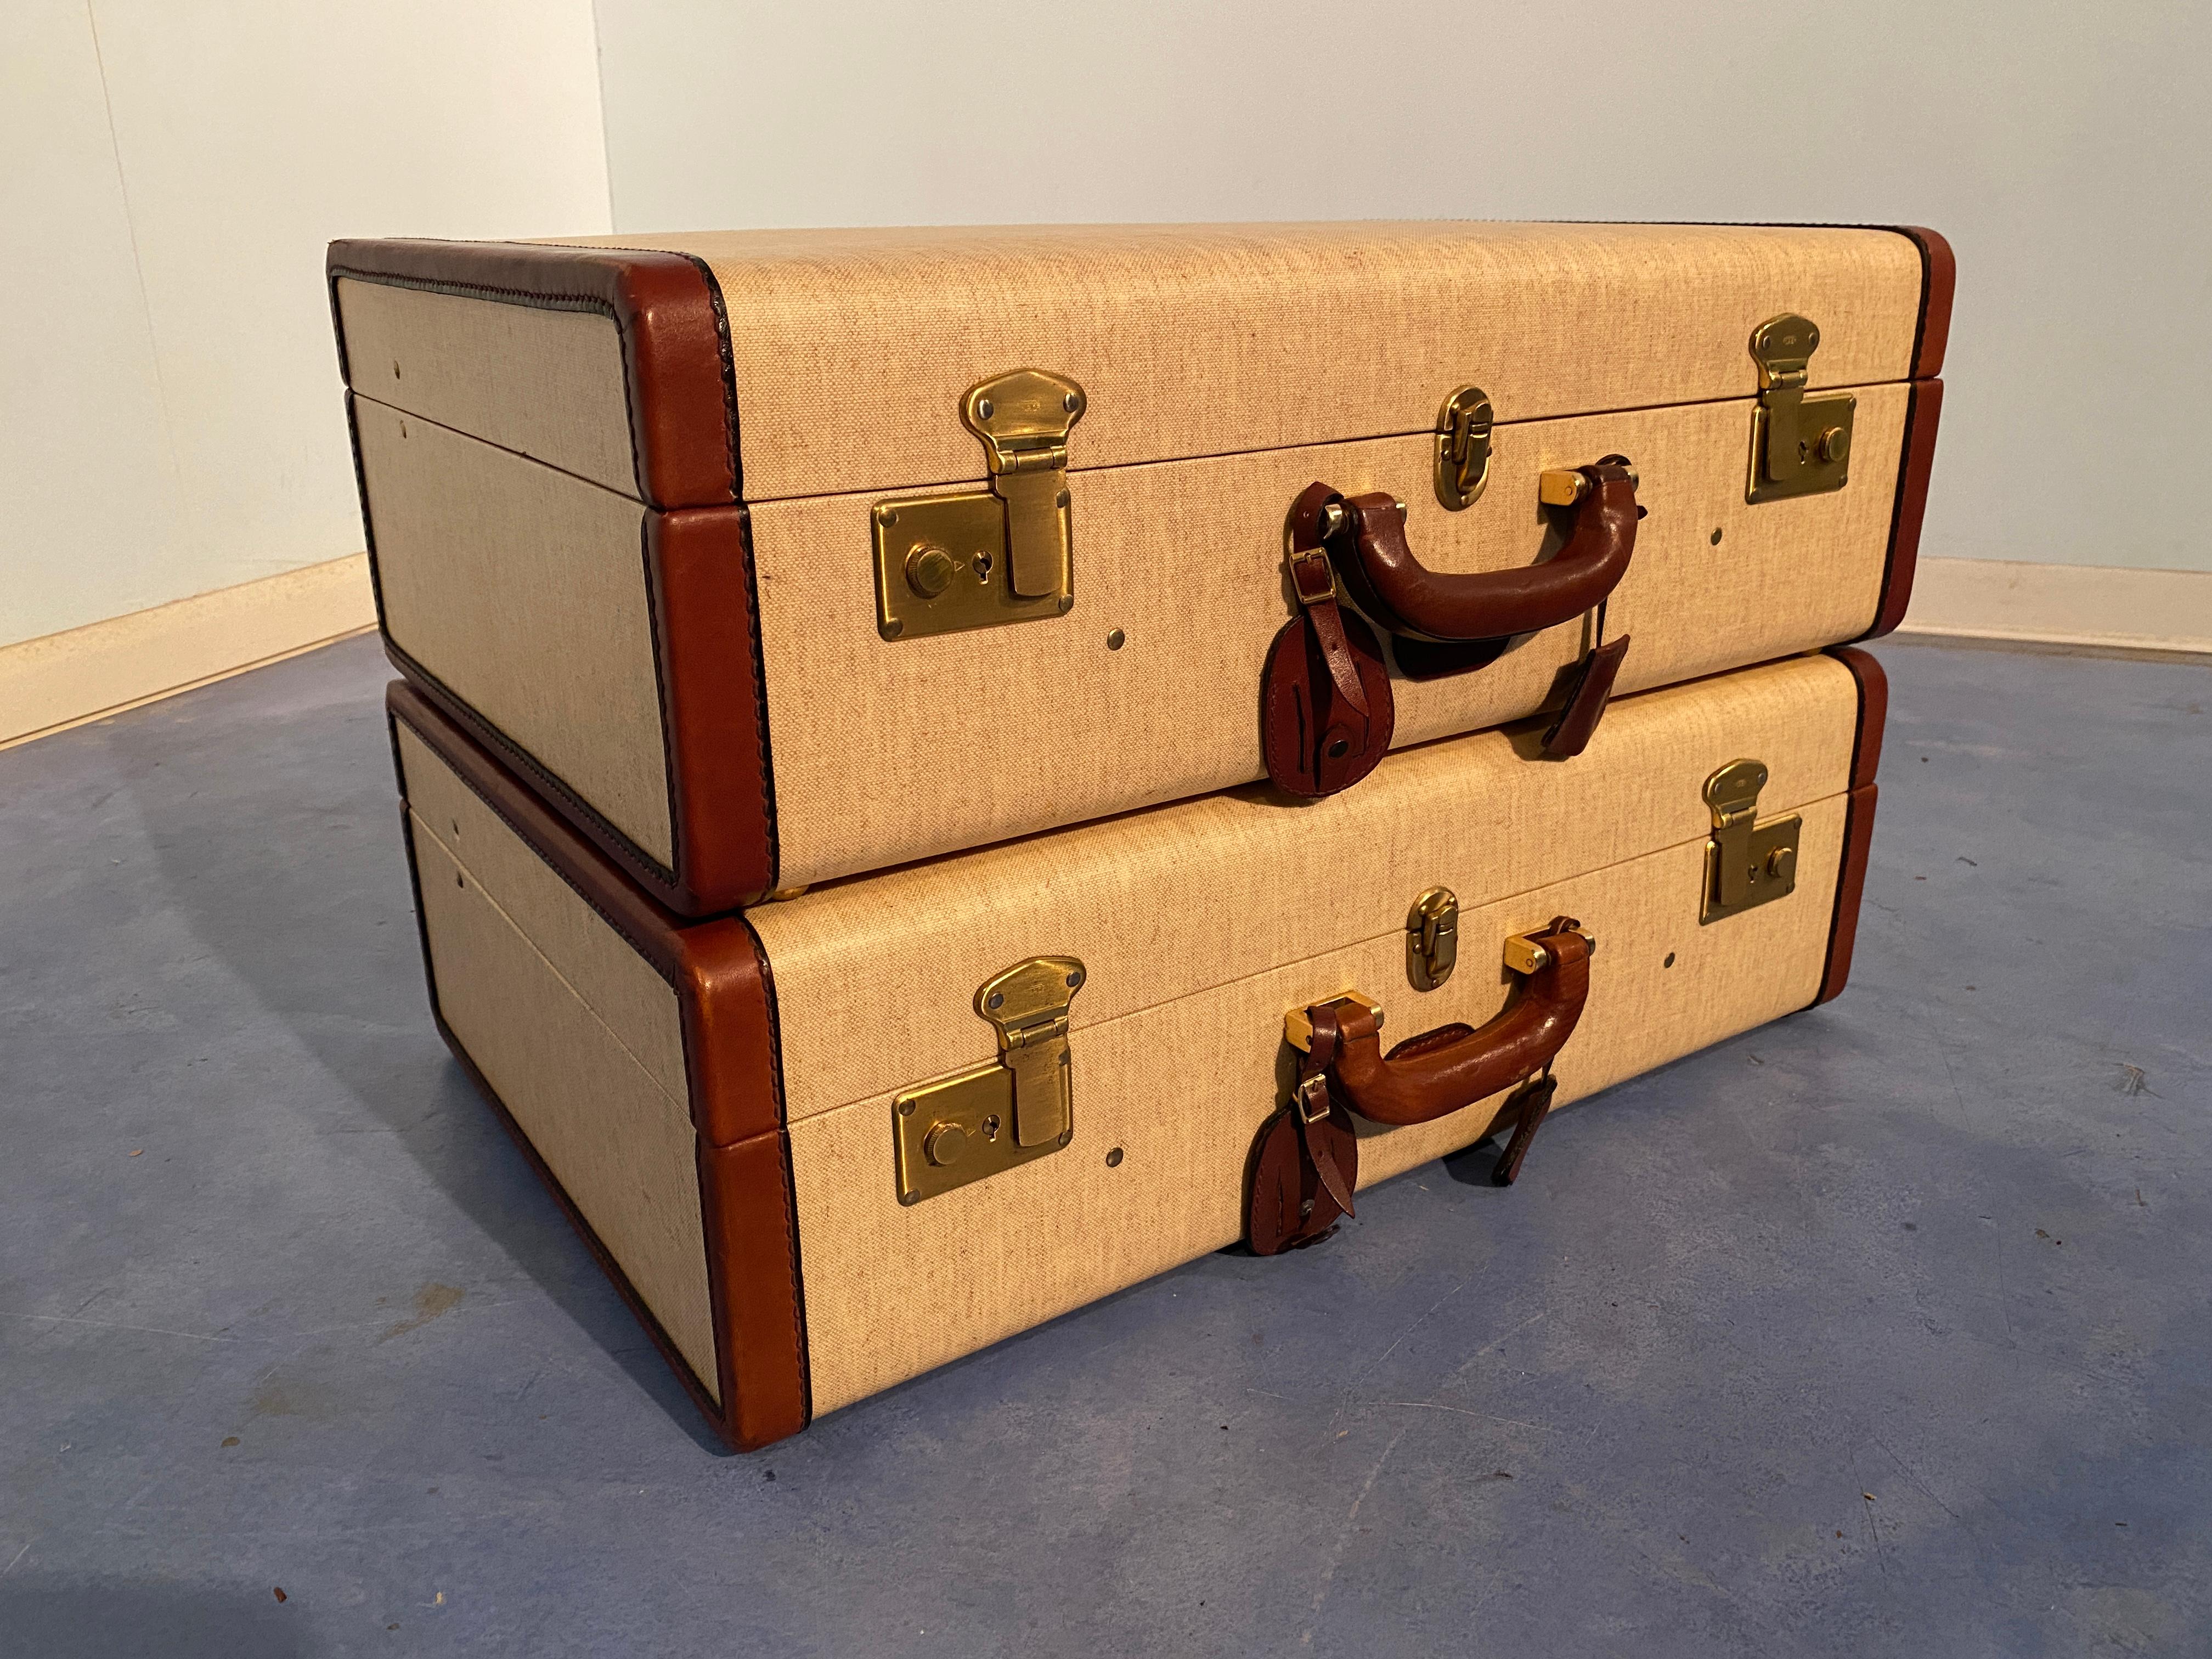 Italian Mid-Century Moder Luggages or Suitcases Mèlange Color, Set of Two, 1960 In Good Condition For Sale In Traversetolo, IT